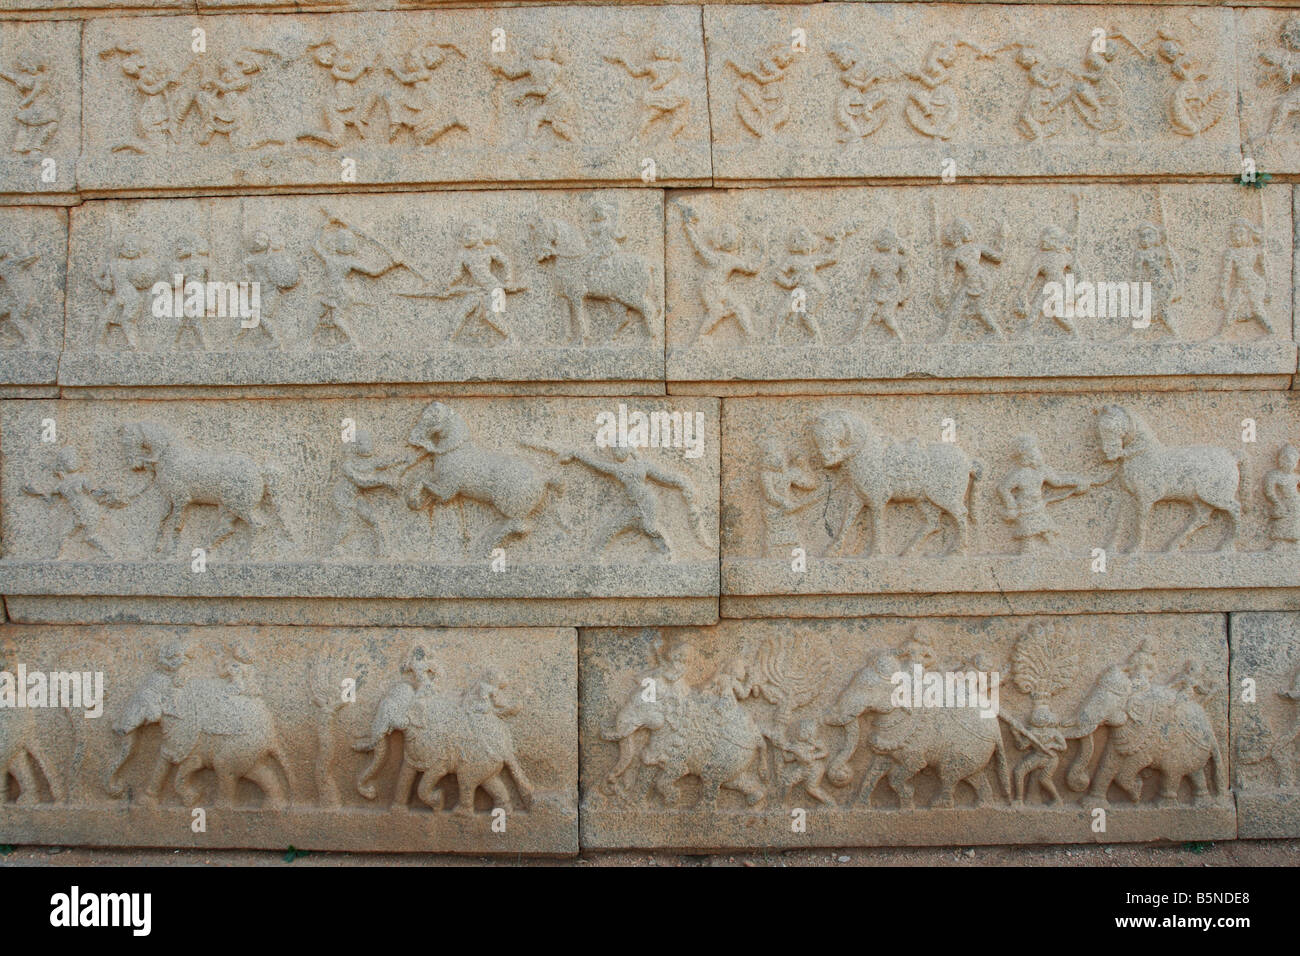 Elephant, horse and camel figures on a wall of a Hindu temple dedicated to Shiva at the ancient site of Hampi, Karnataka, India Stock Photo